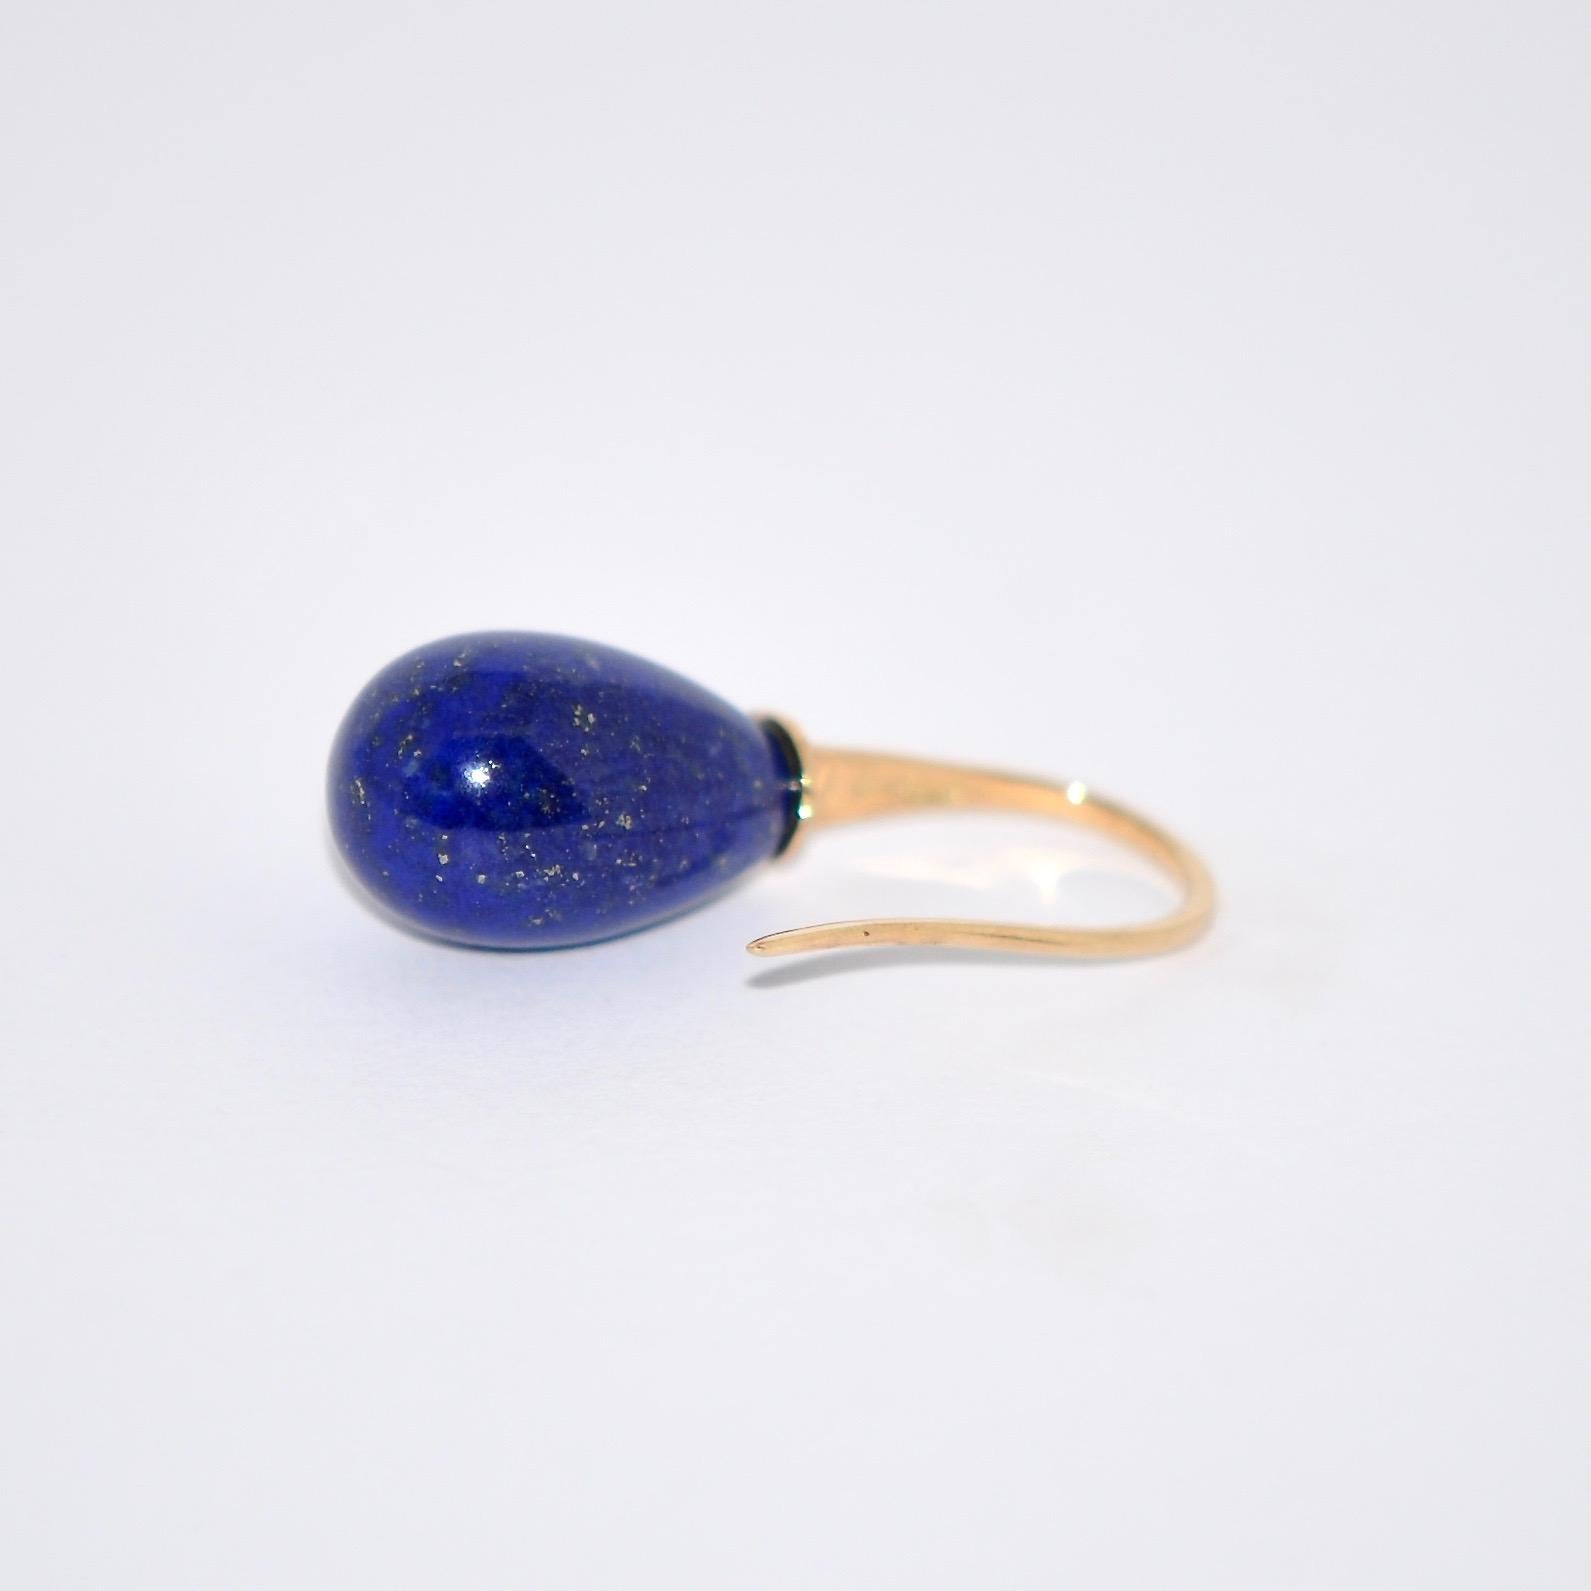 Lapis Lazuli and Yellow Gold 18 Karat Drop Earrings
French Collection by Mesure et Art du Temps.

Discover this Lapis Lazuli and Yellow Gold 18 Karat Drop Earrings.
The benefit of the Lapis Lazuli is that they uses water energy. It then regulates